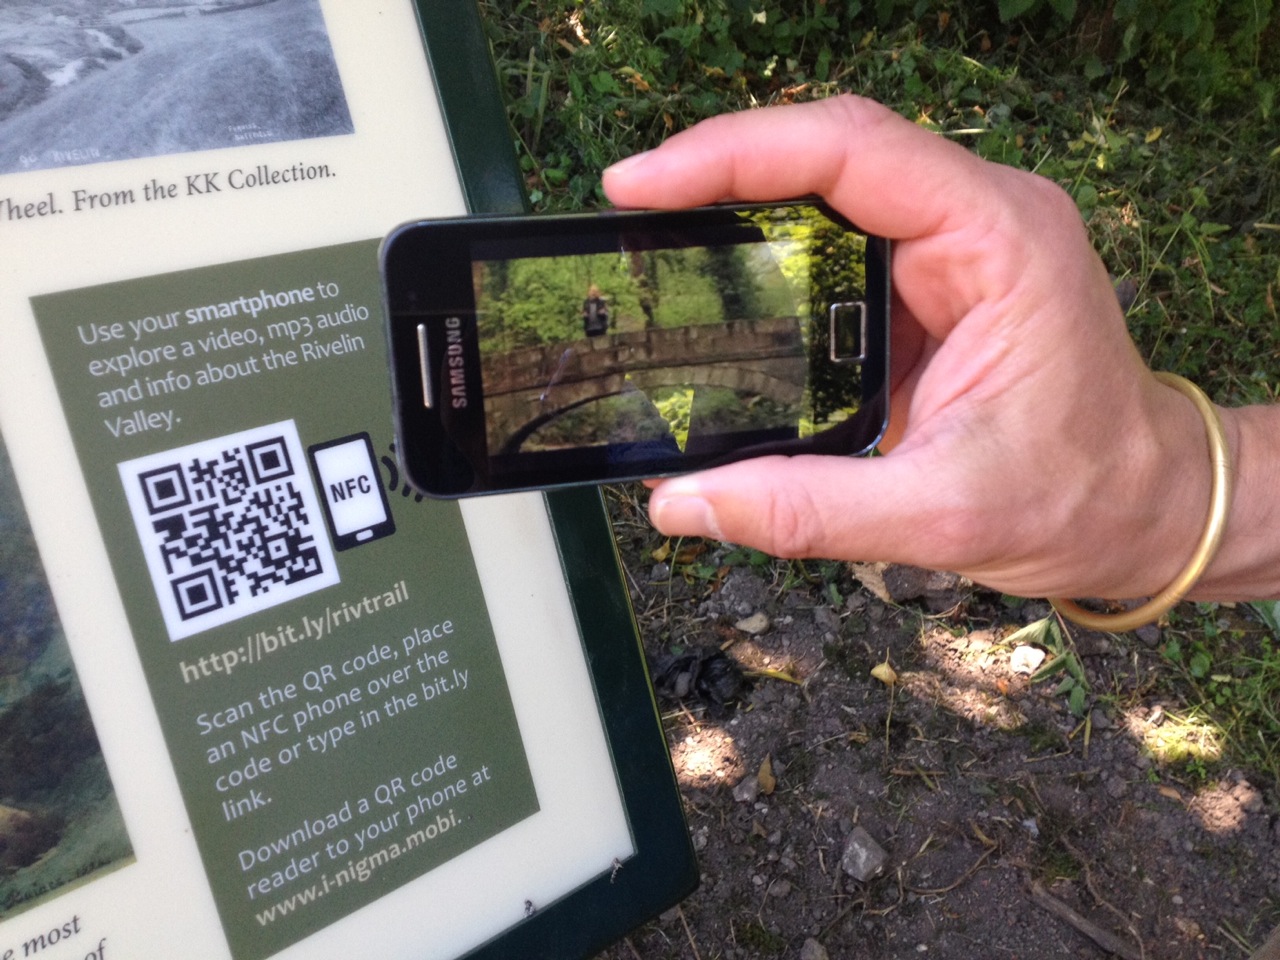 Scanning a QR code on an information panel